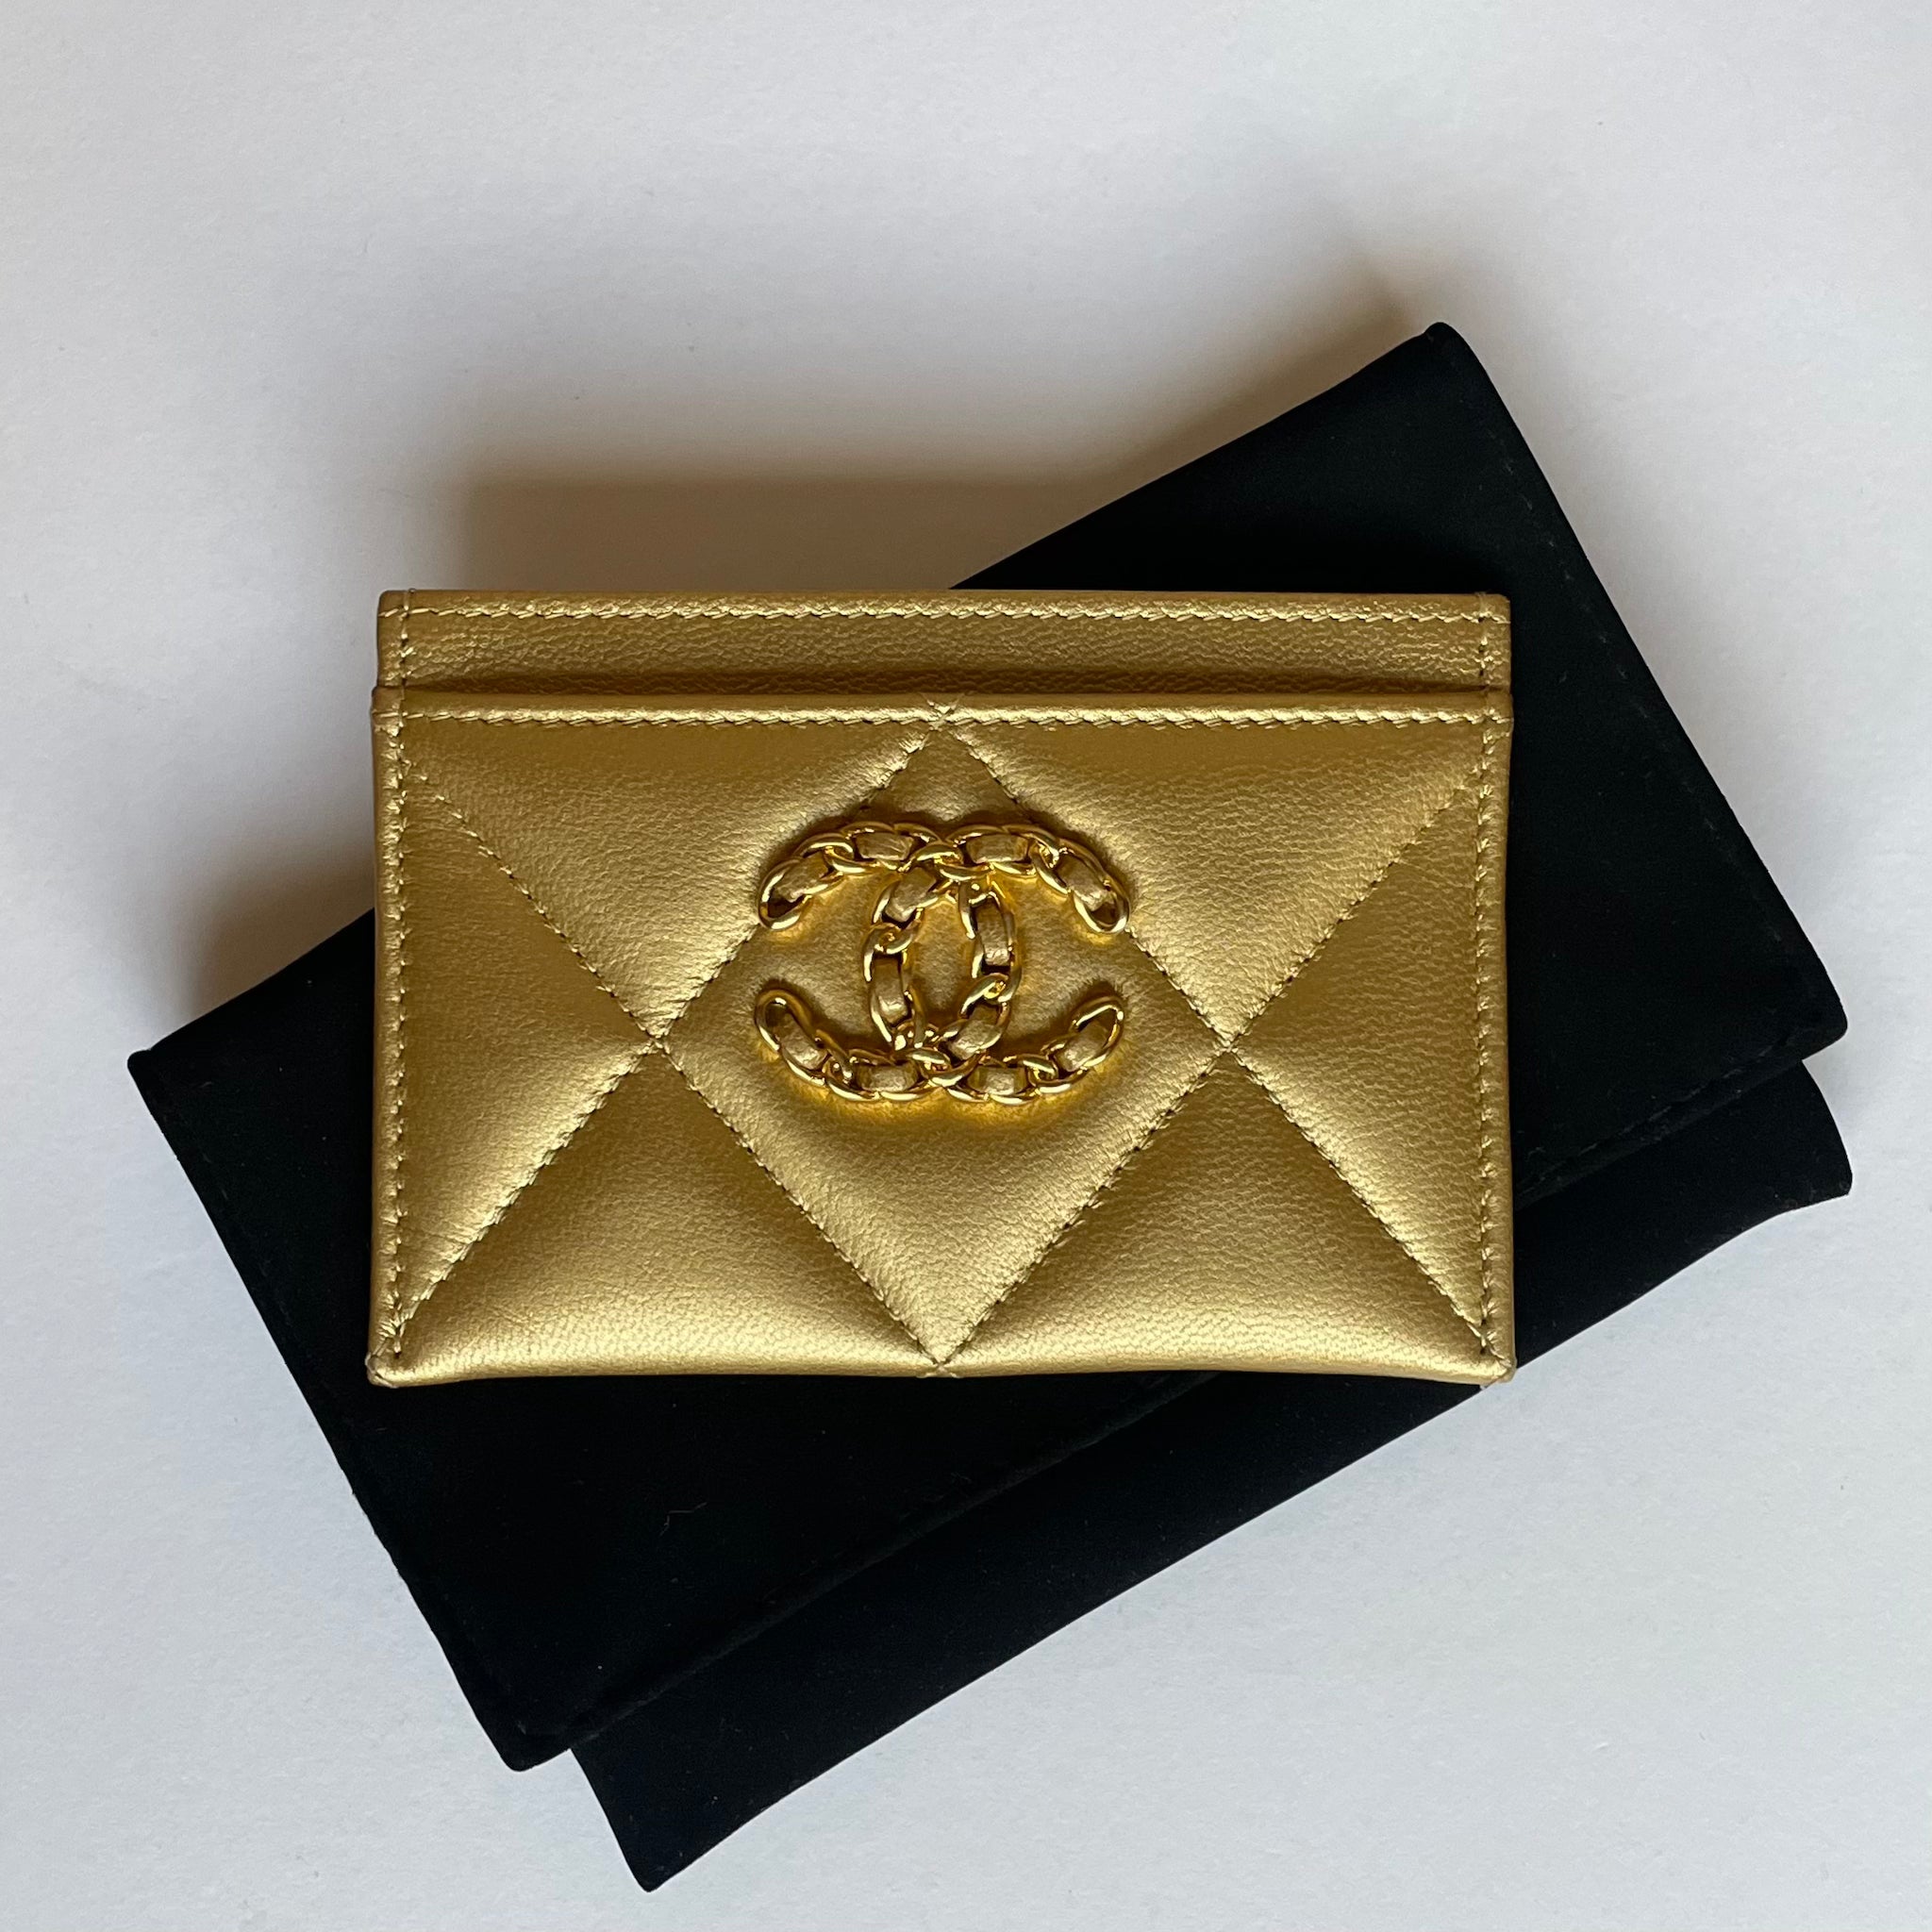 Chanel 19 Gold Metallic Quilted Lambskin Cardholder